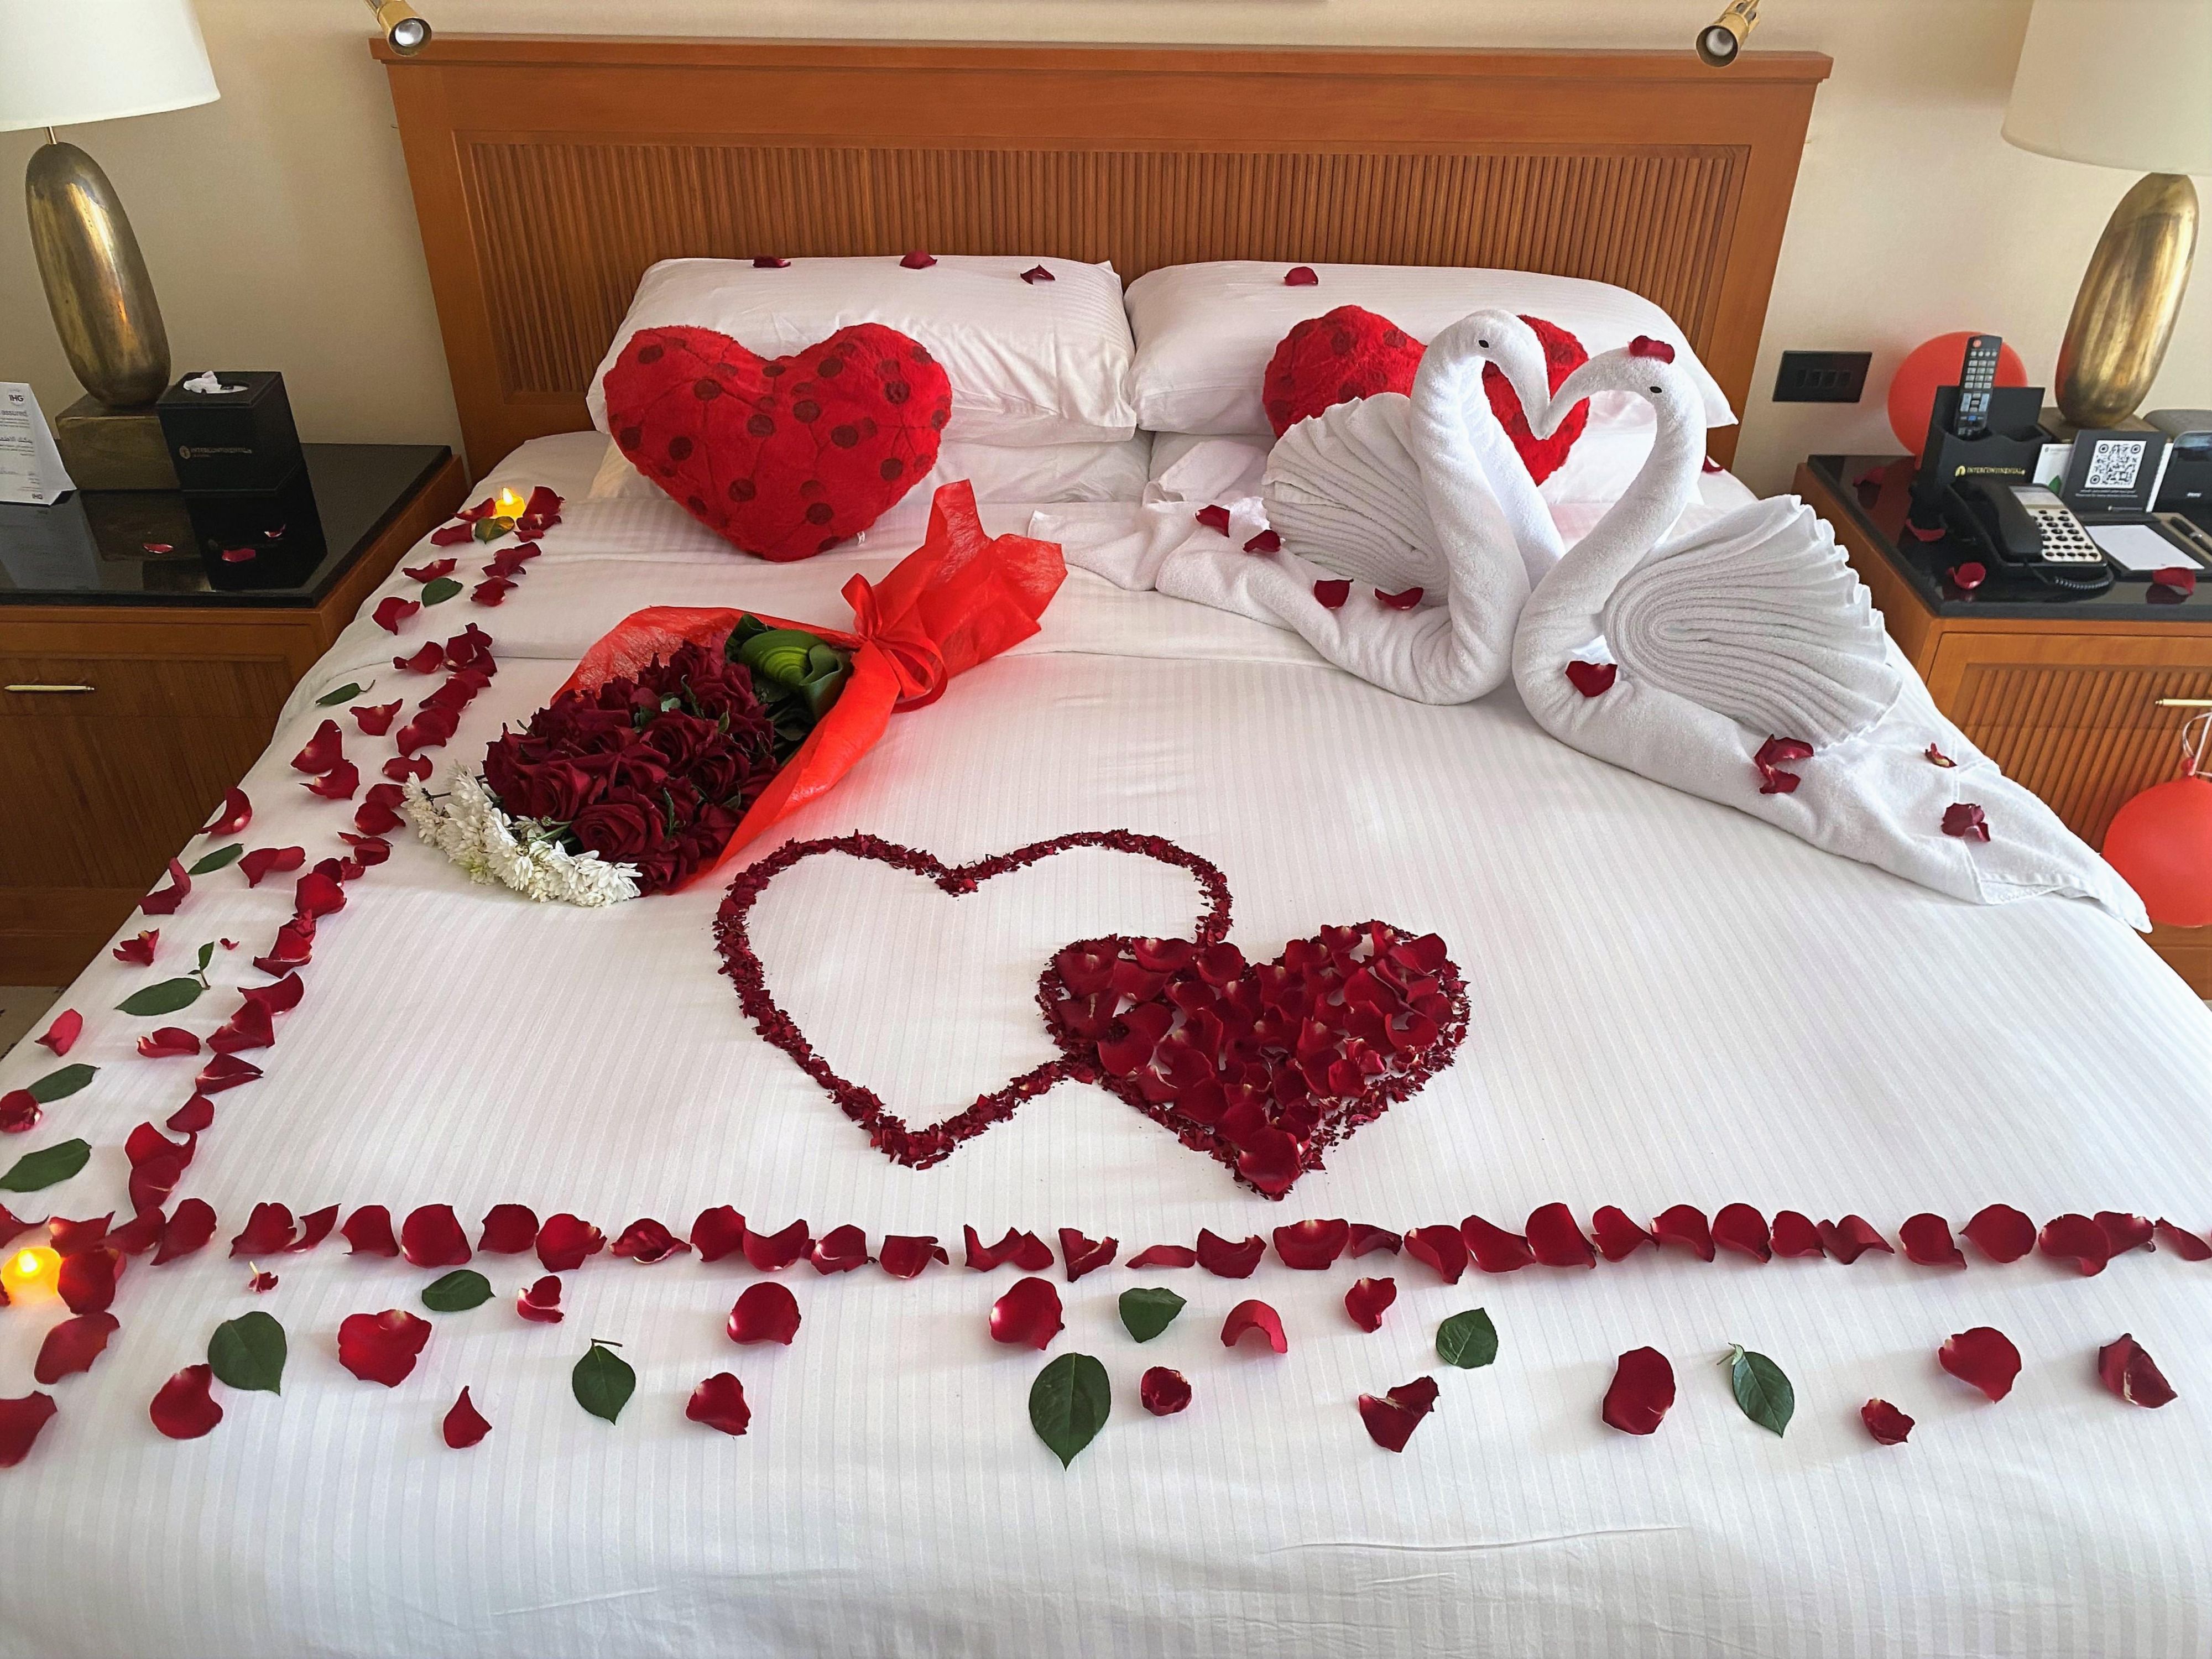 Unforgettable romantic experience